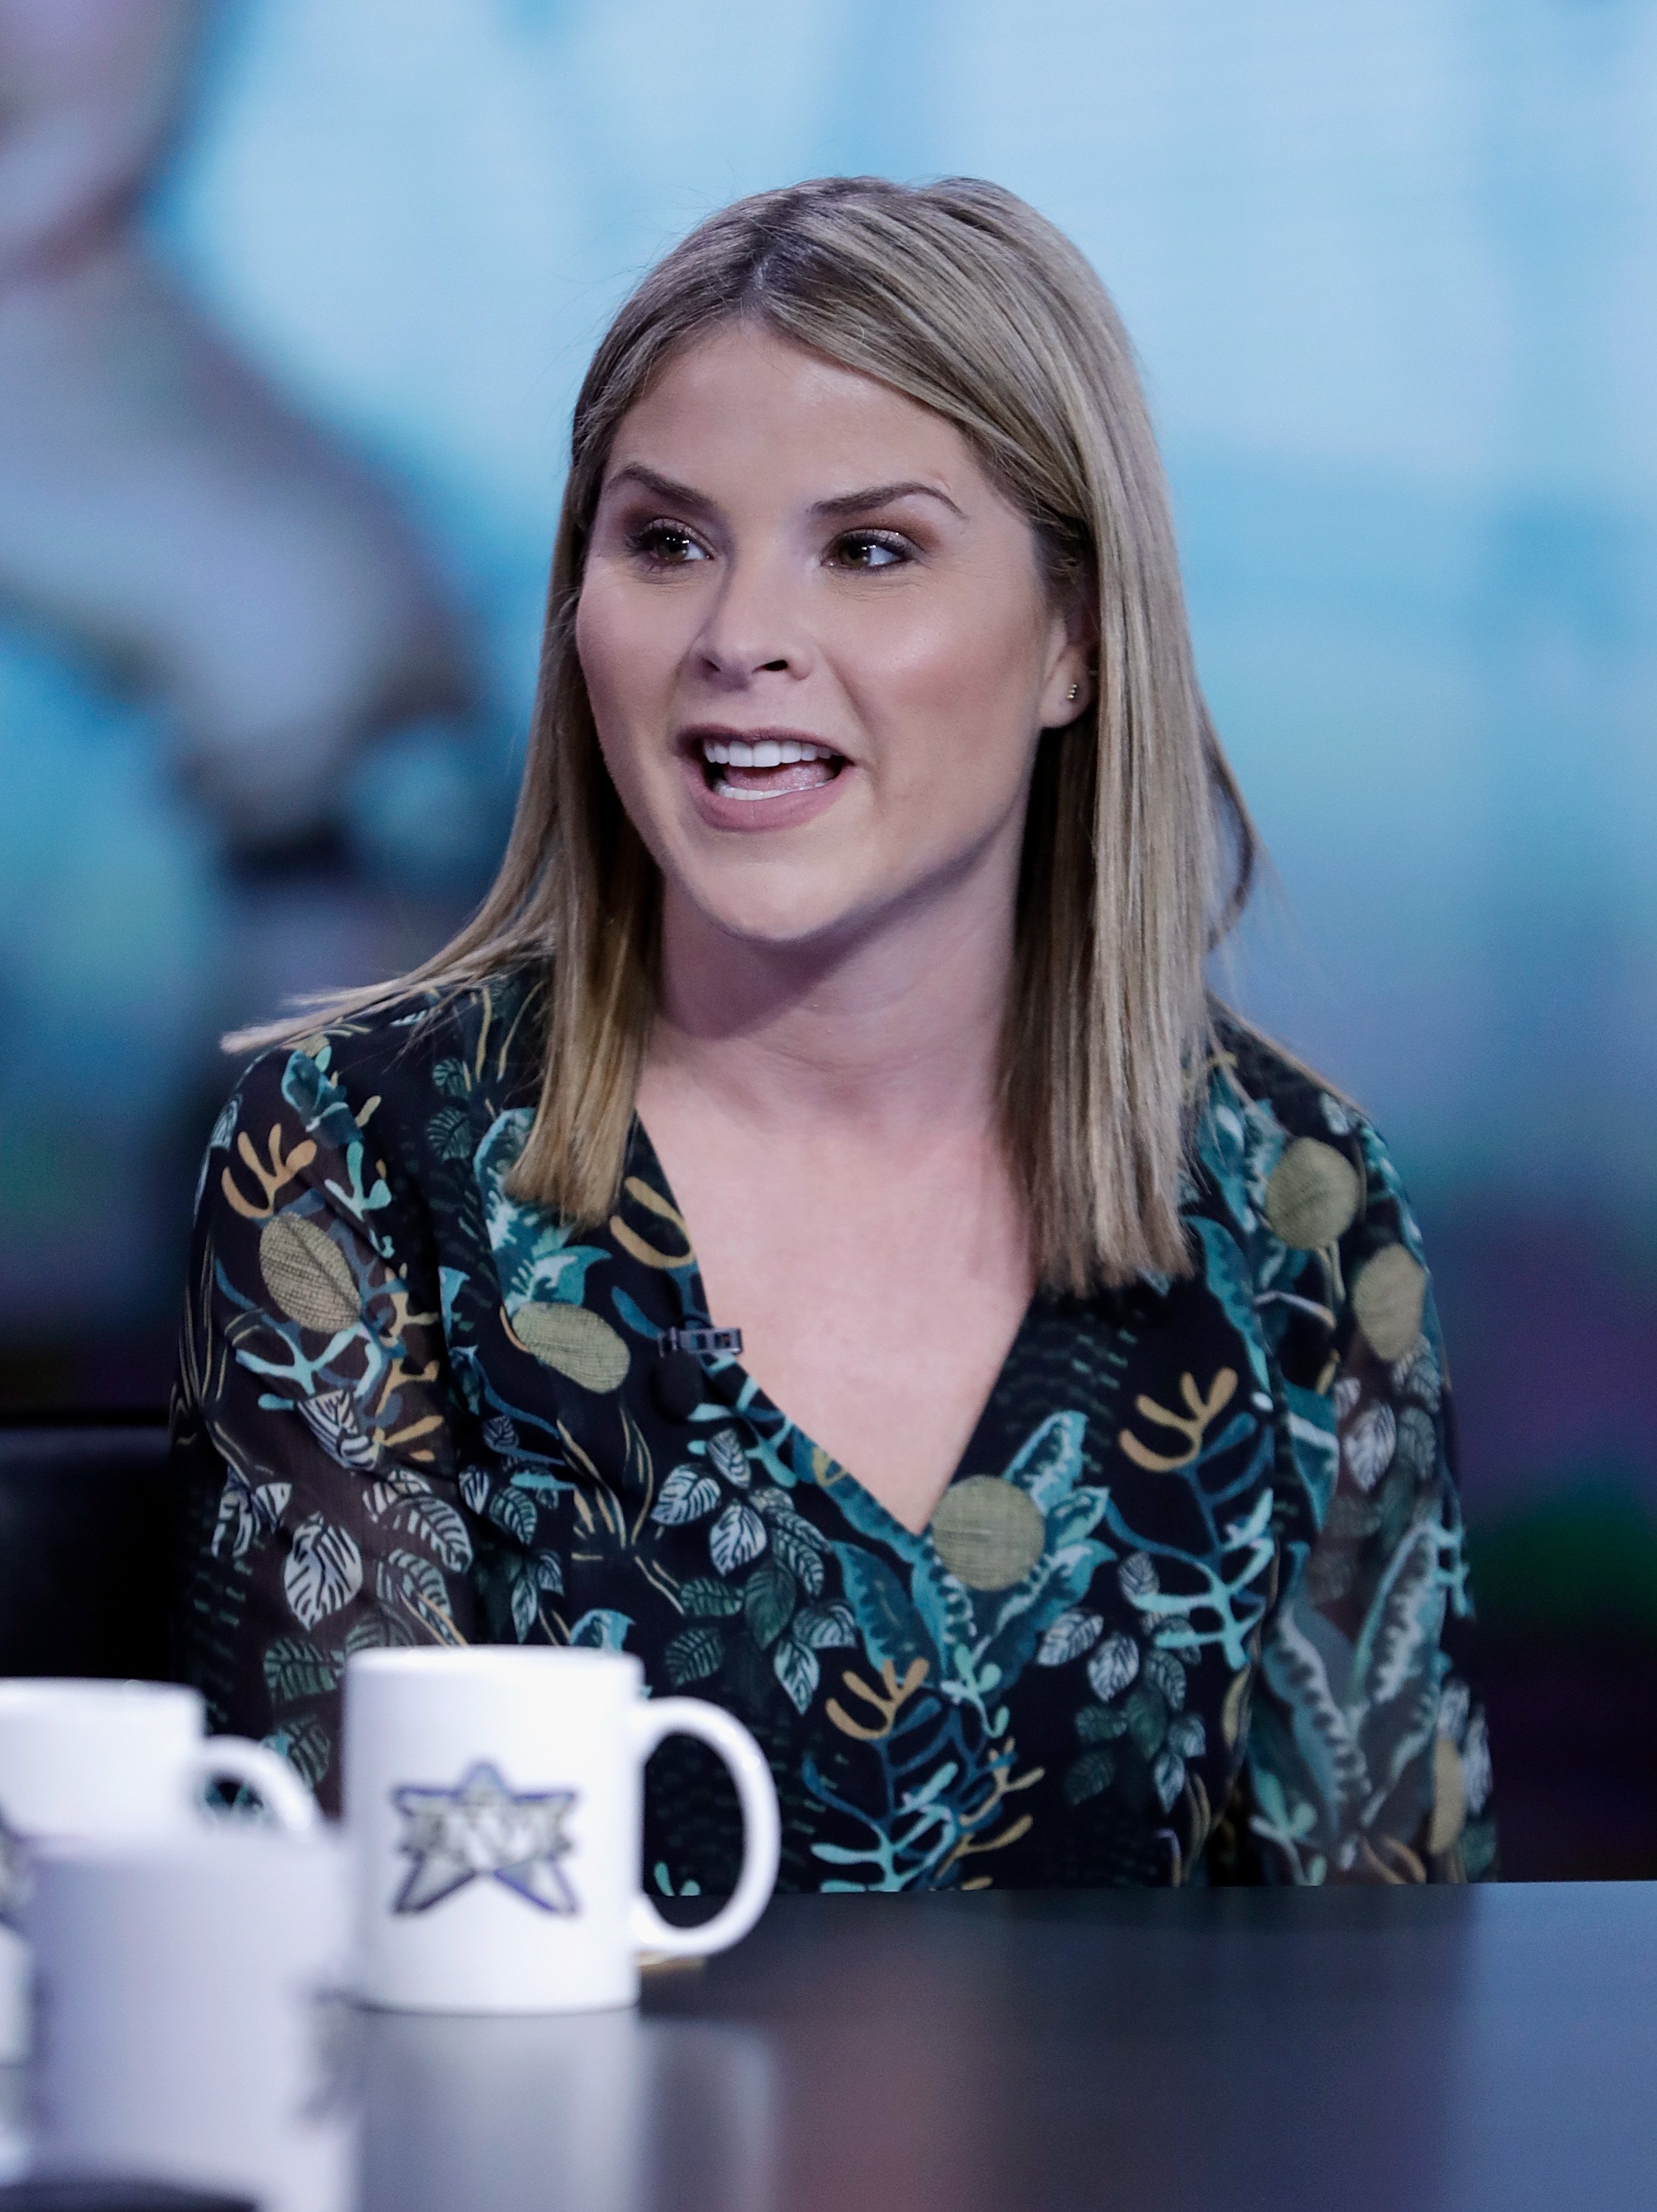 Jenna Bush Hager visits "The Five" in New York City on November 13, 2017 | Photo: Getty Images